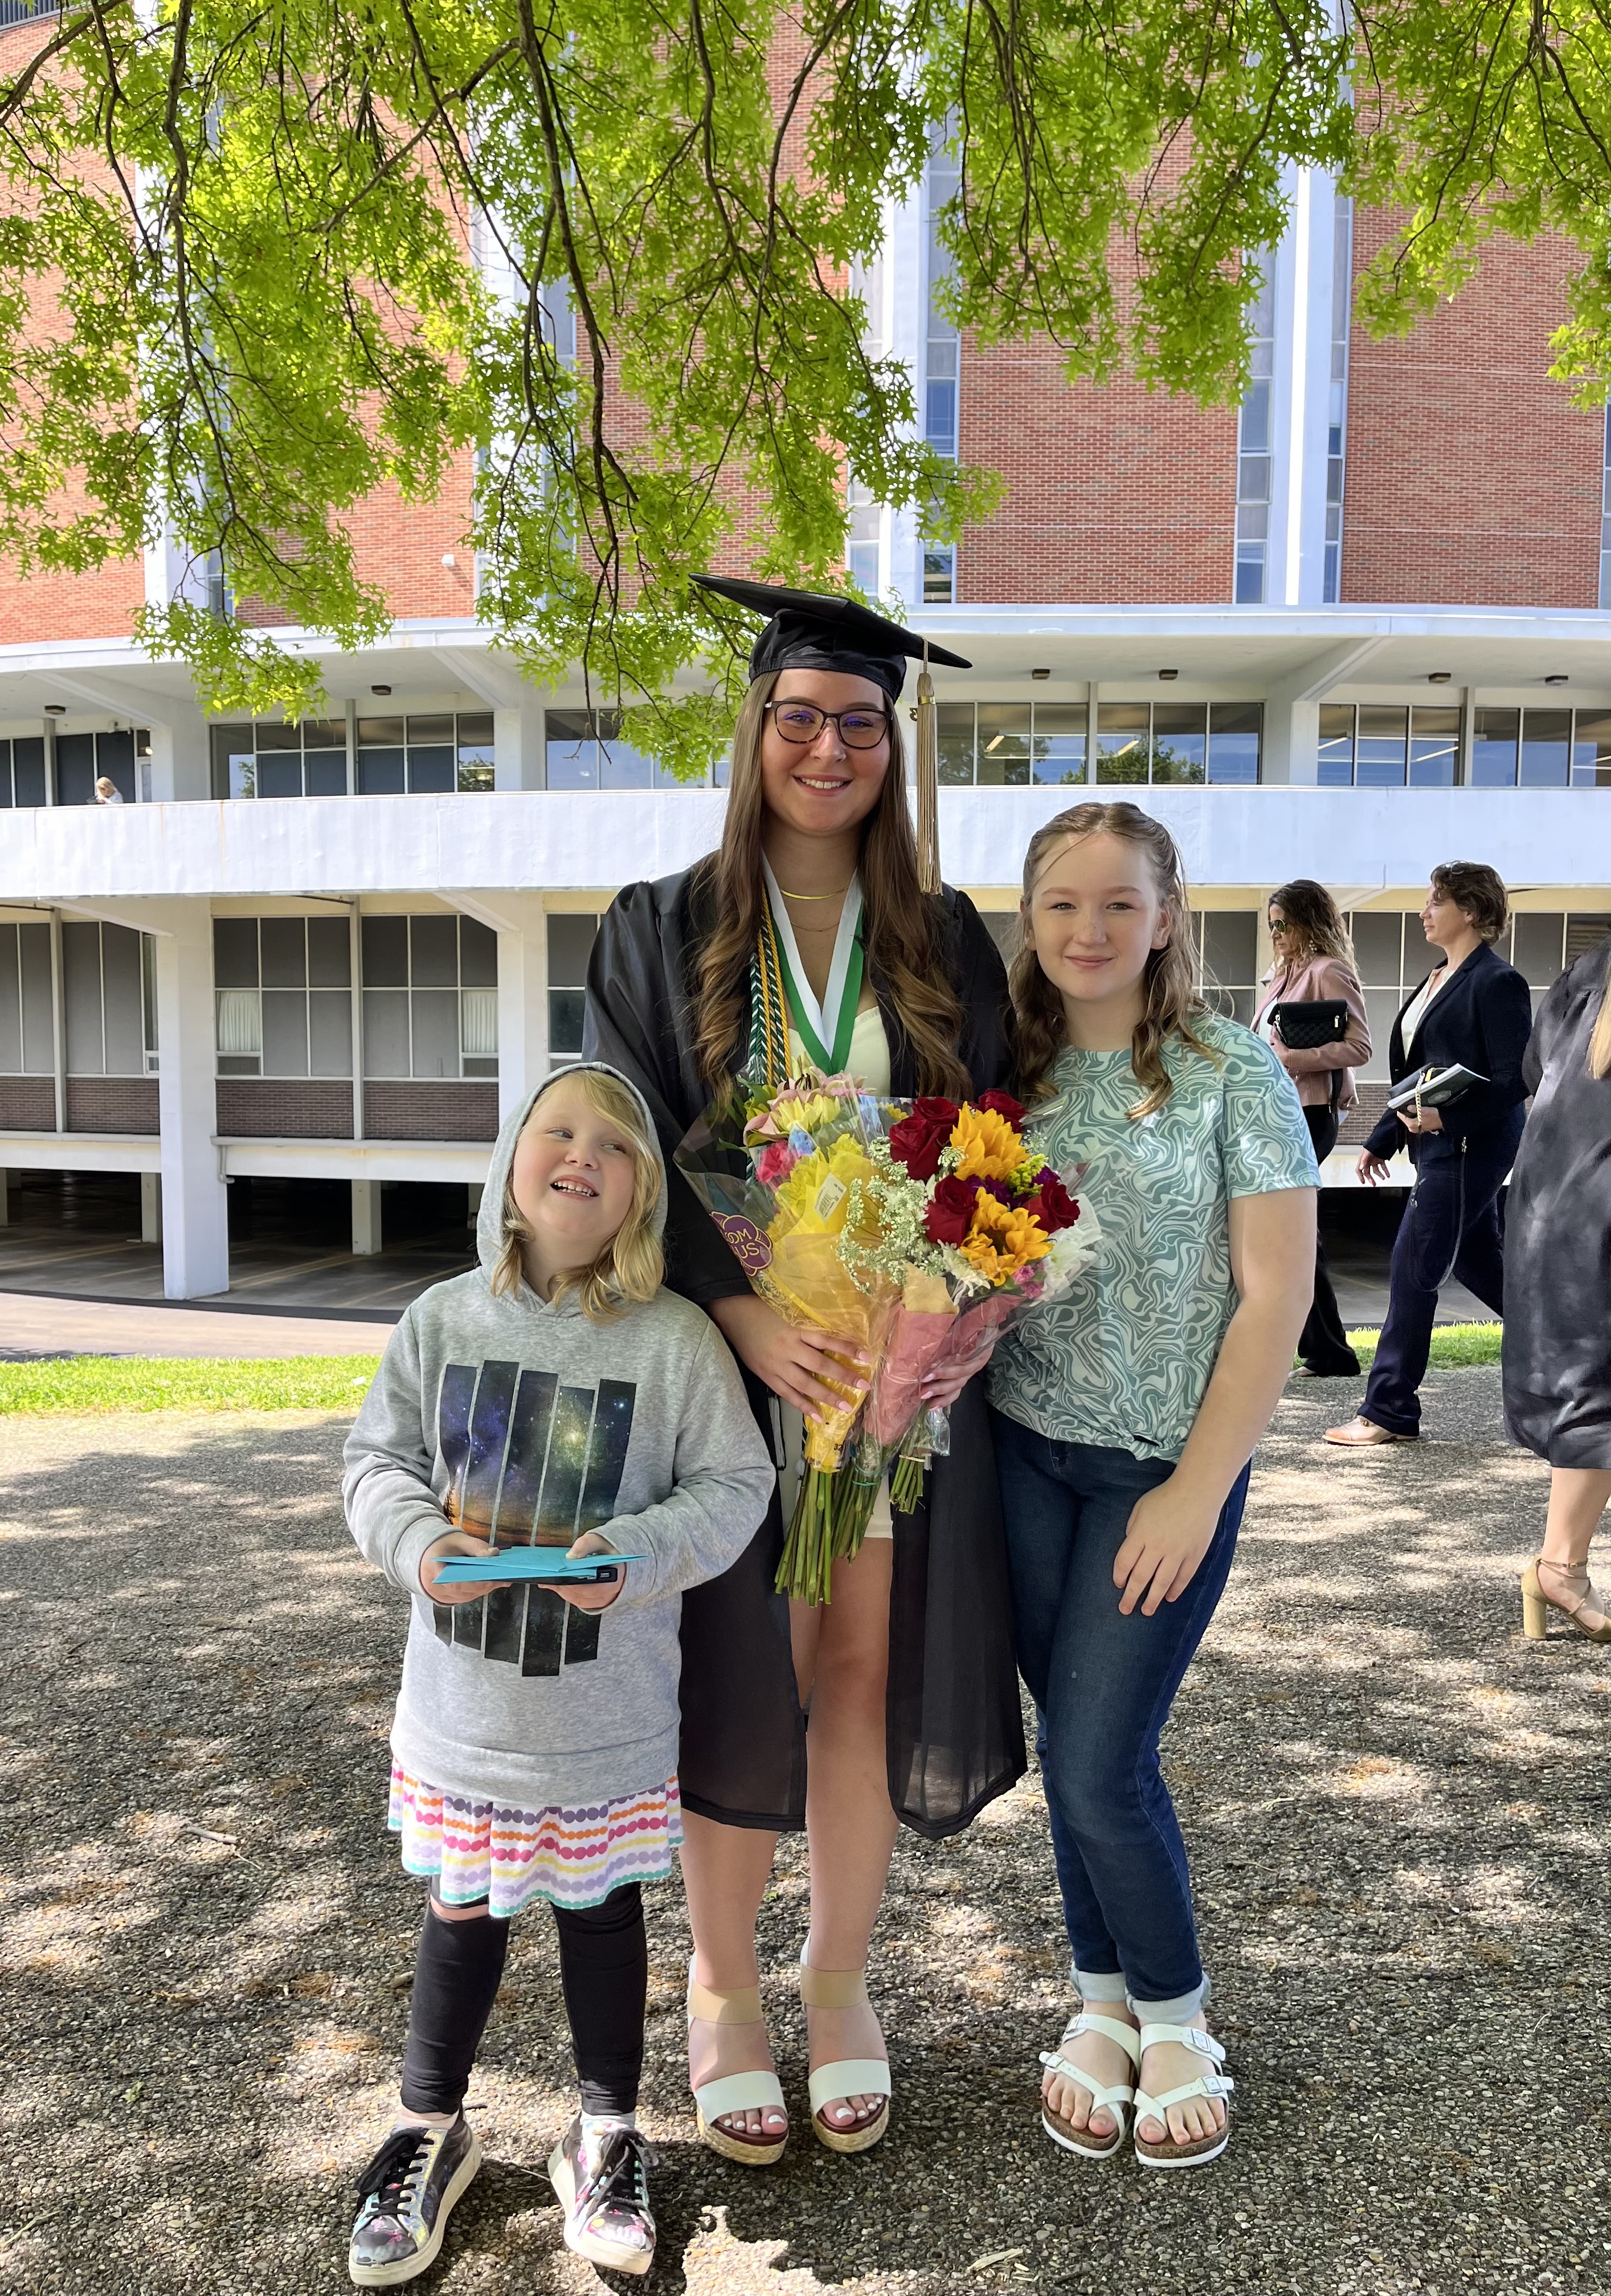 Nova and her two sisters at her college graduation.